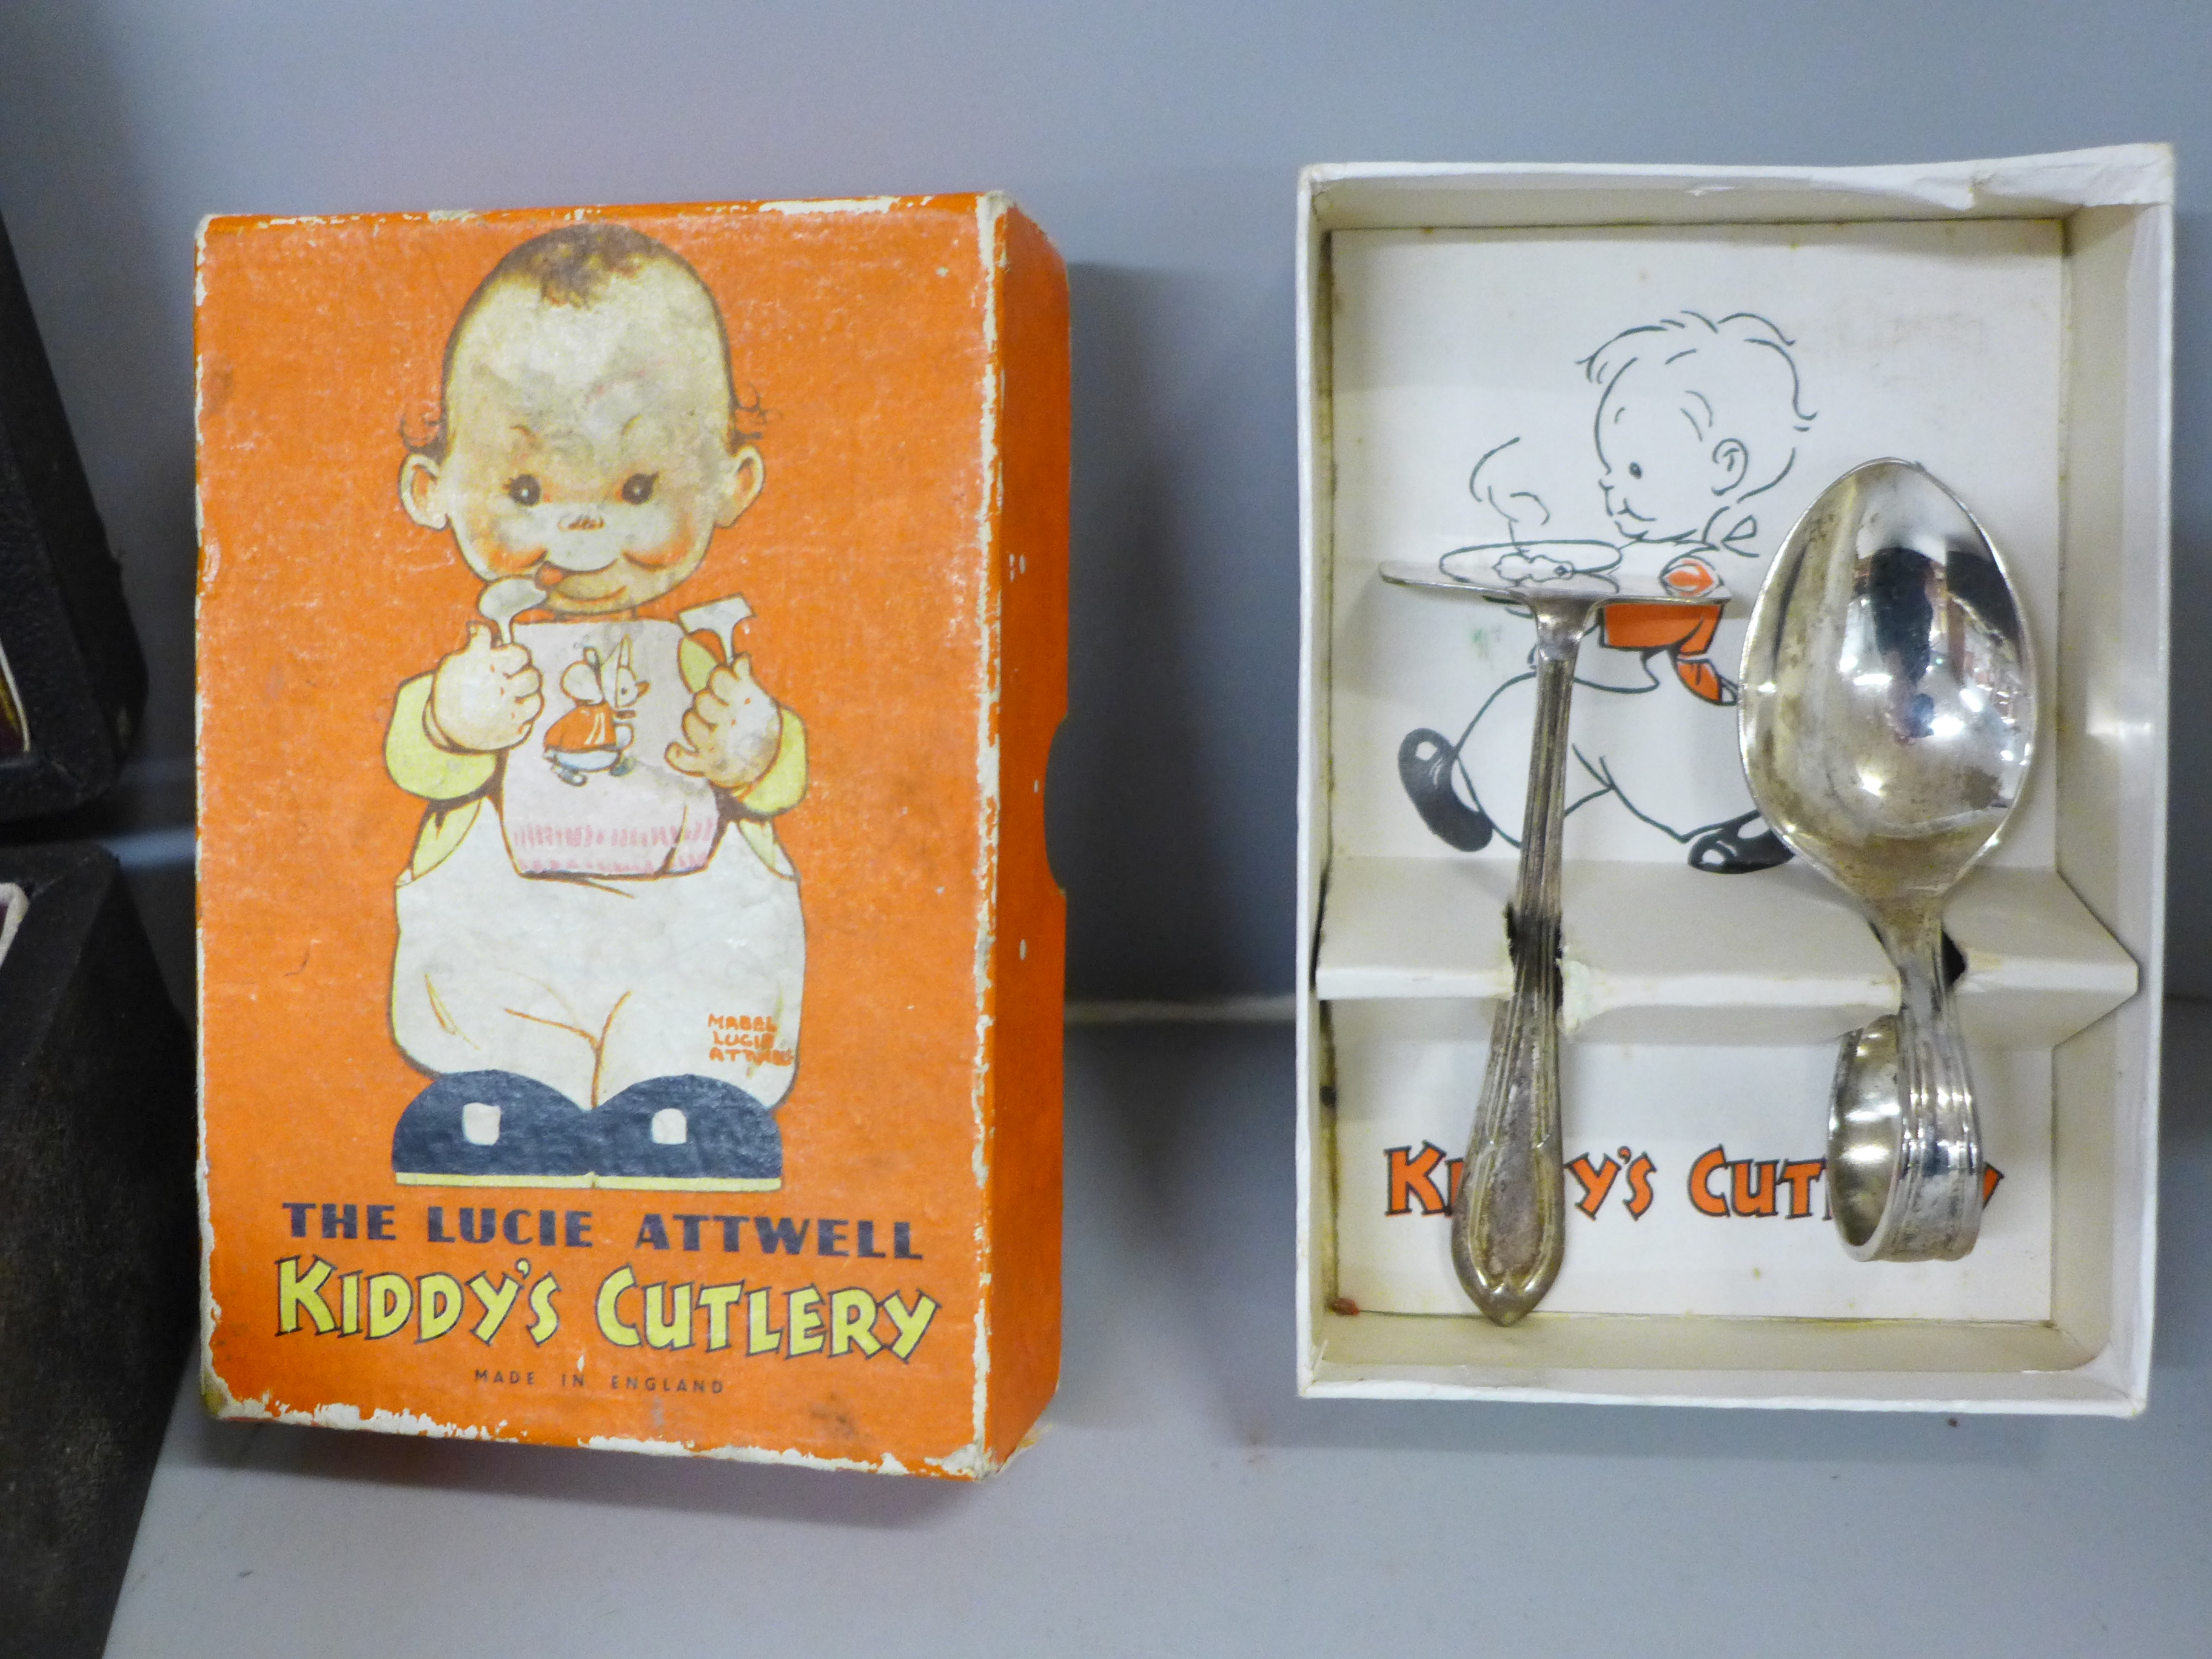 A collection of flatware and a boxed The Lucie Attwell Kiddy's Cutlery set, boxed - Image 2 of 3